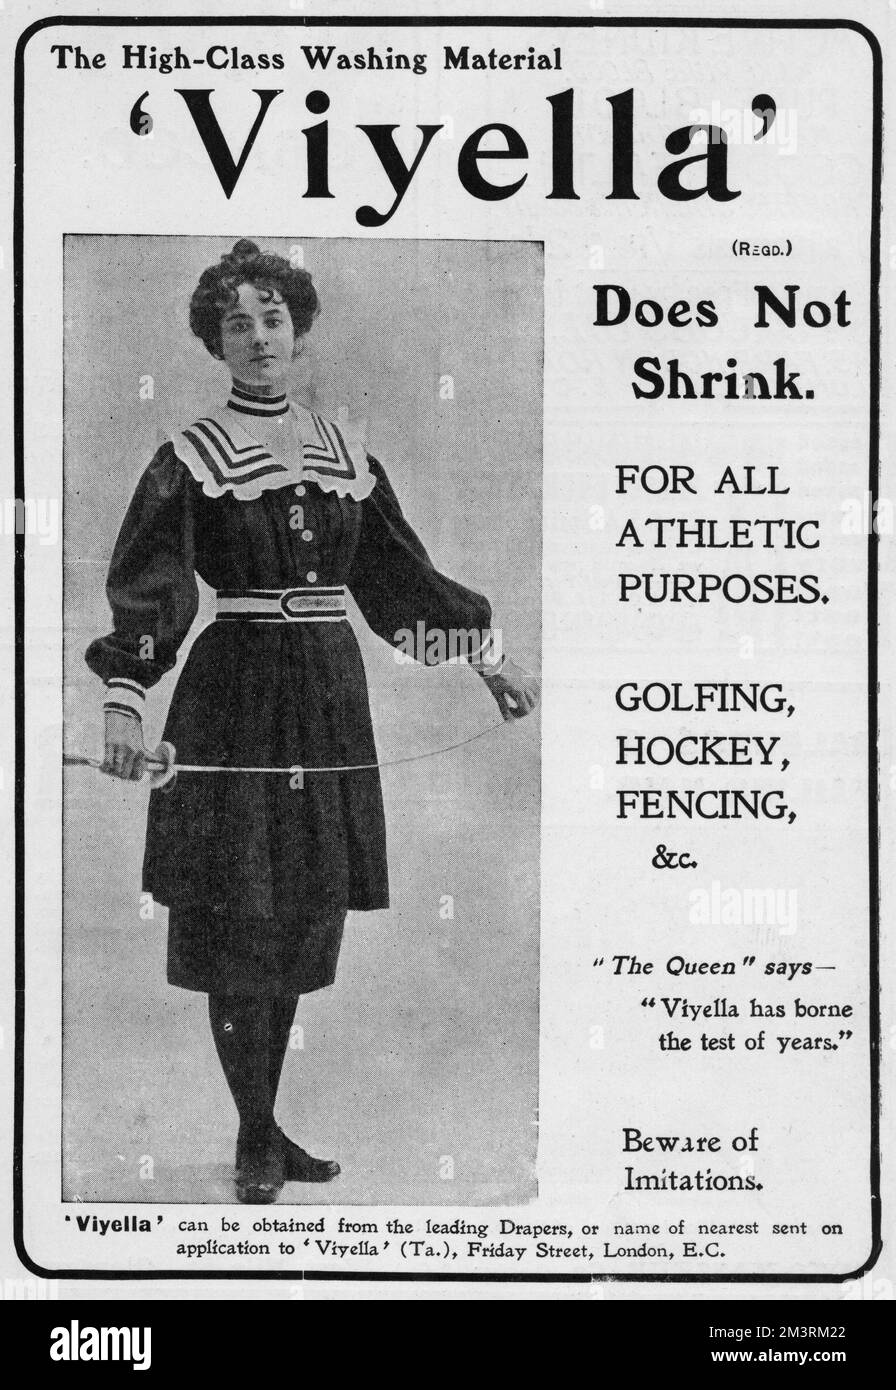 Advertisement for Viyella, 'high-class washing material' suitable for all athletic purposes including golfing, hockey and fencing.  Ideal for the active young woman of 1903.  1903 Stock Photo